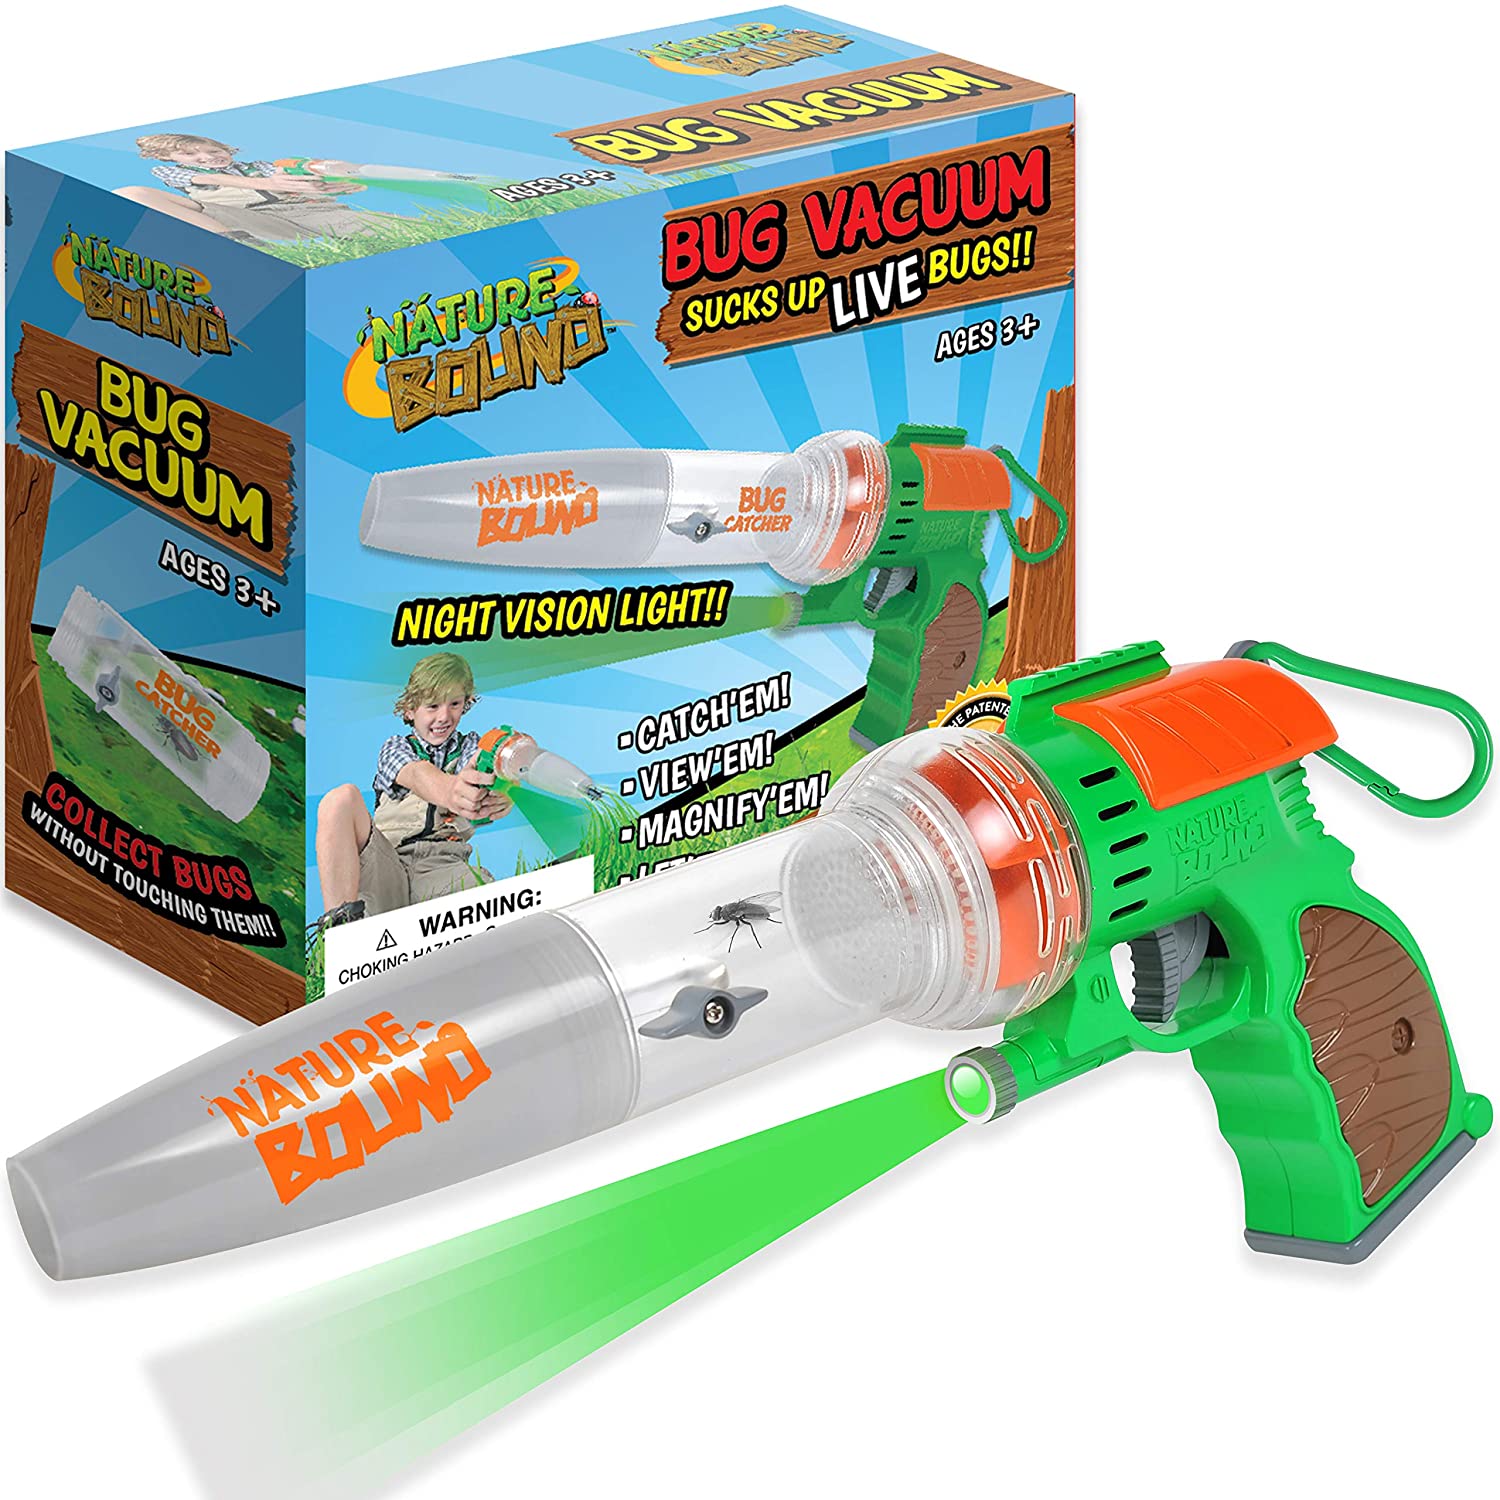 Nature Bound Bug Catcher Toy, Eco-Friendly Bug Vacuum, Catch and Release Indoor:Outdoor Play